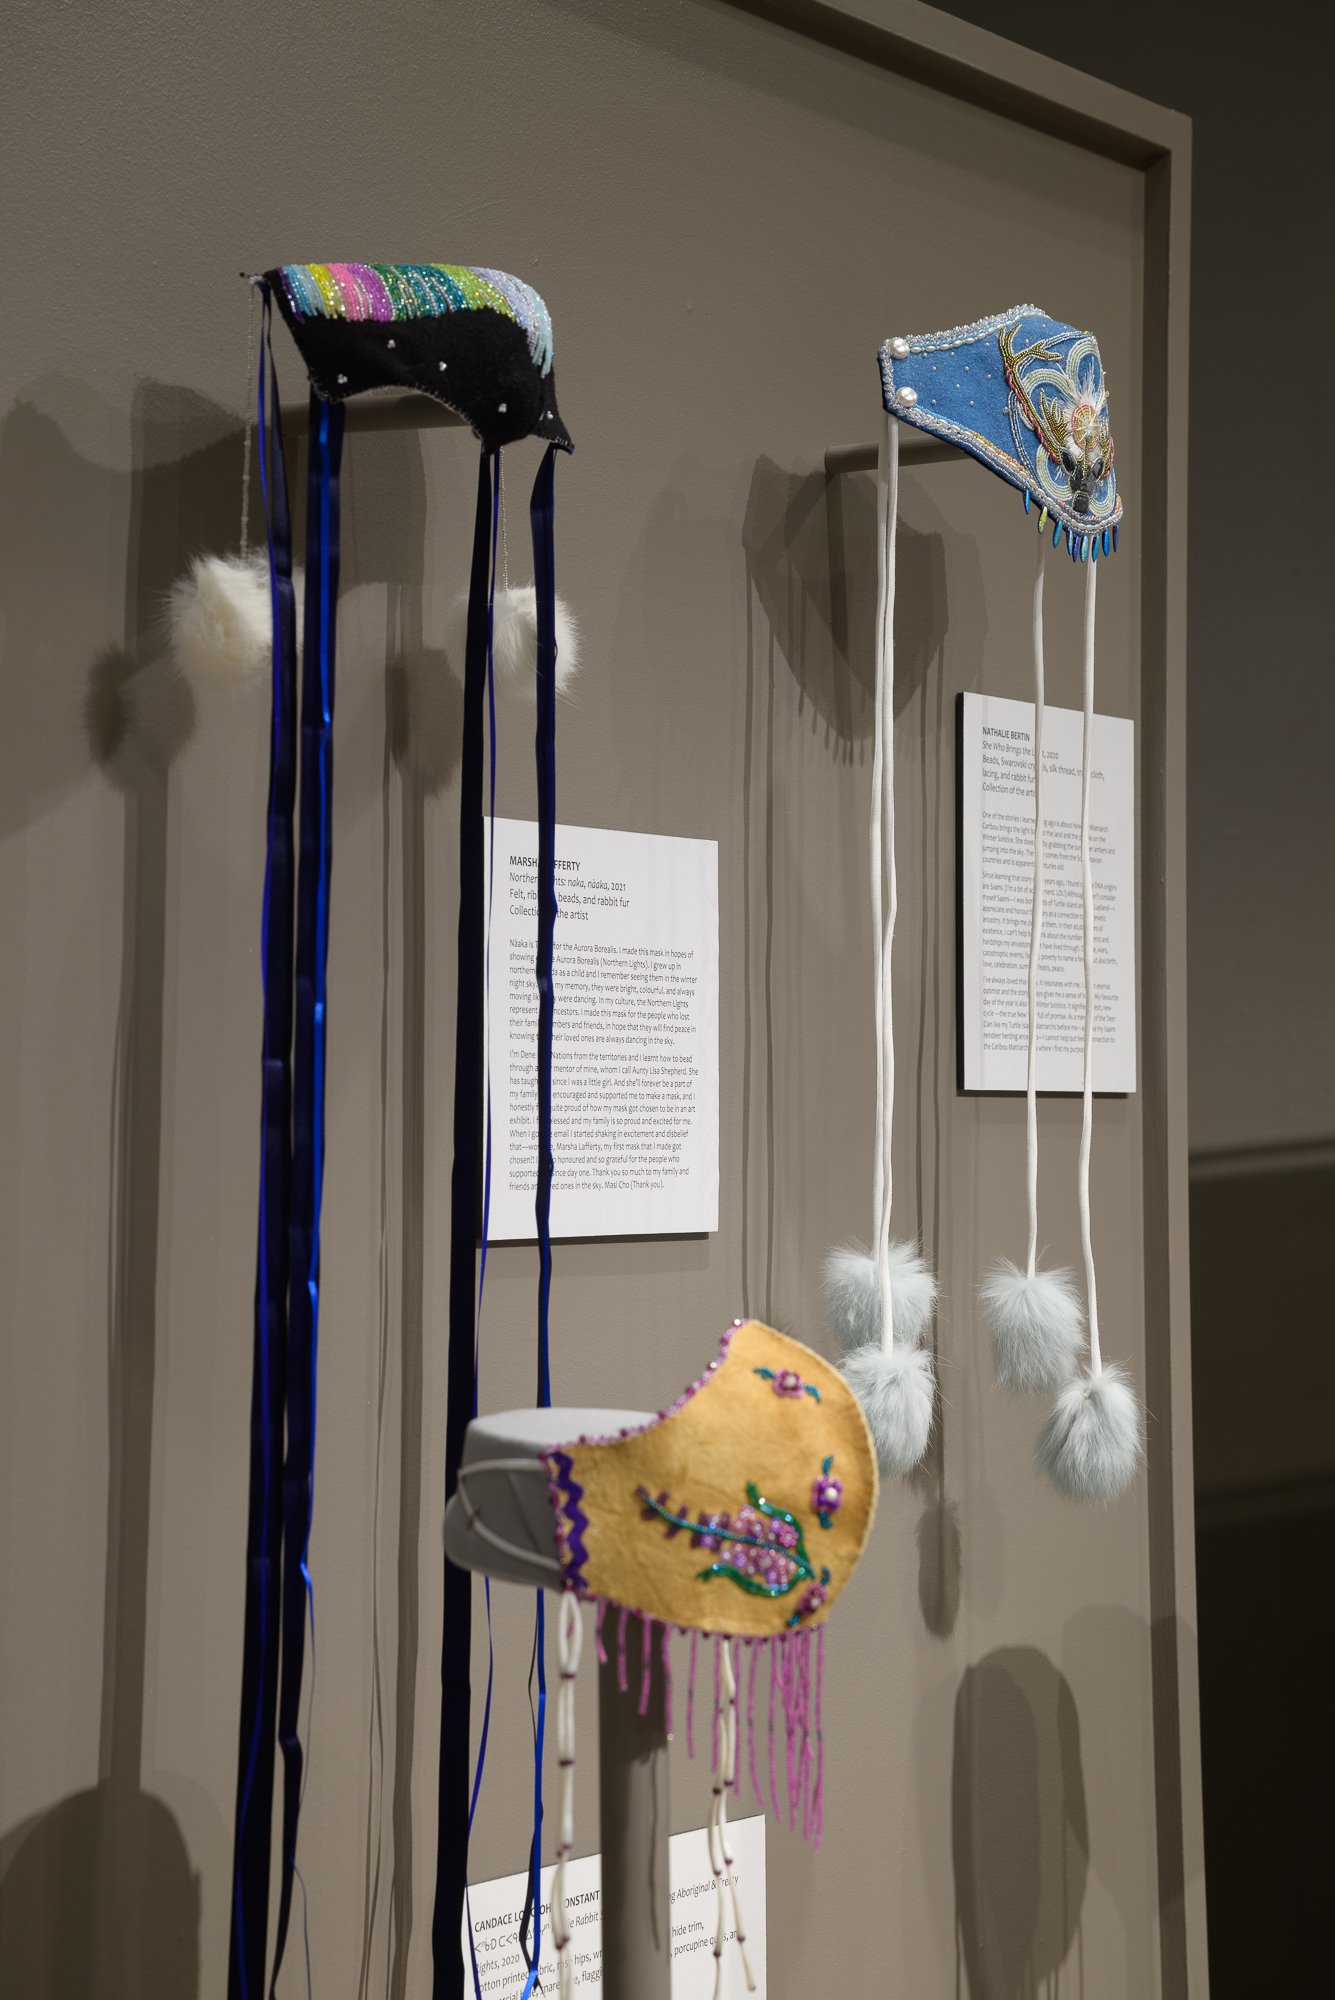  Masks on display in the  Breathe. (2nd Wave)  exhibit. Photo by Galt Museum &amp; Archives 